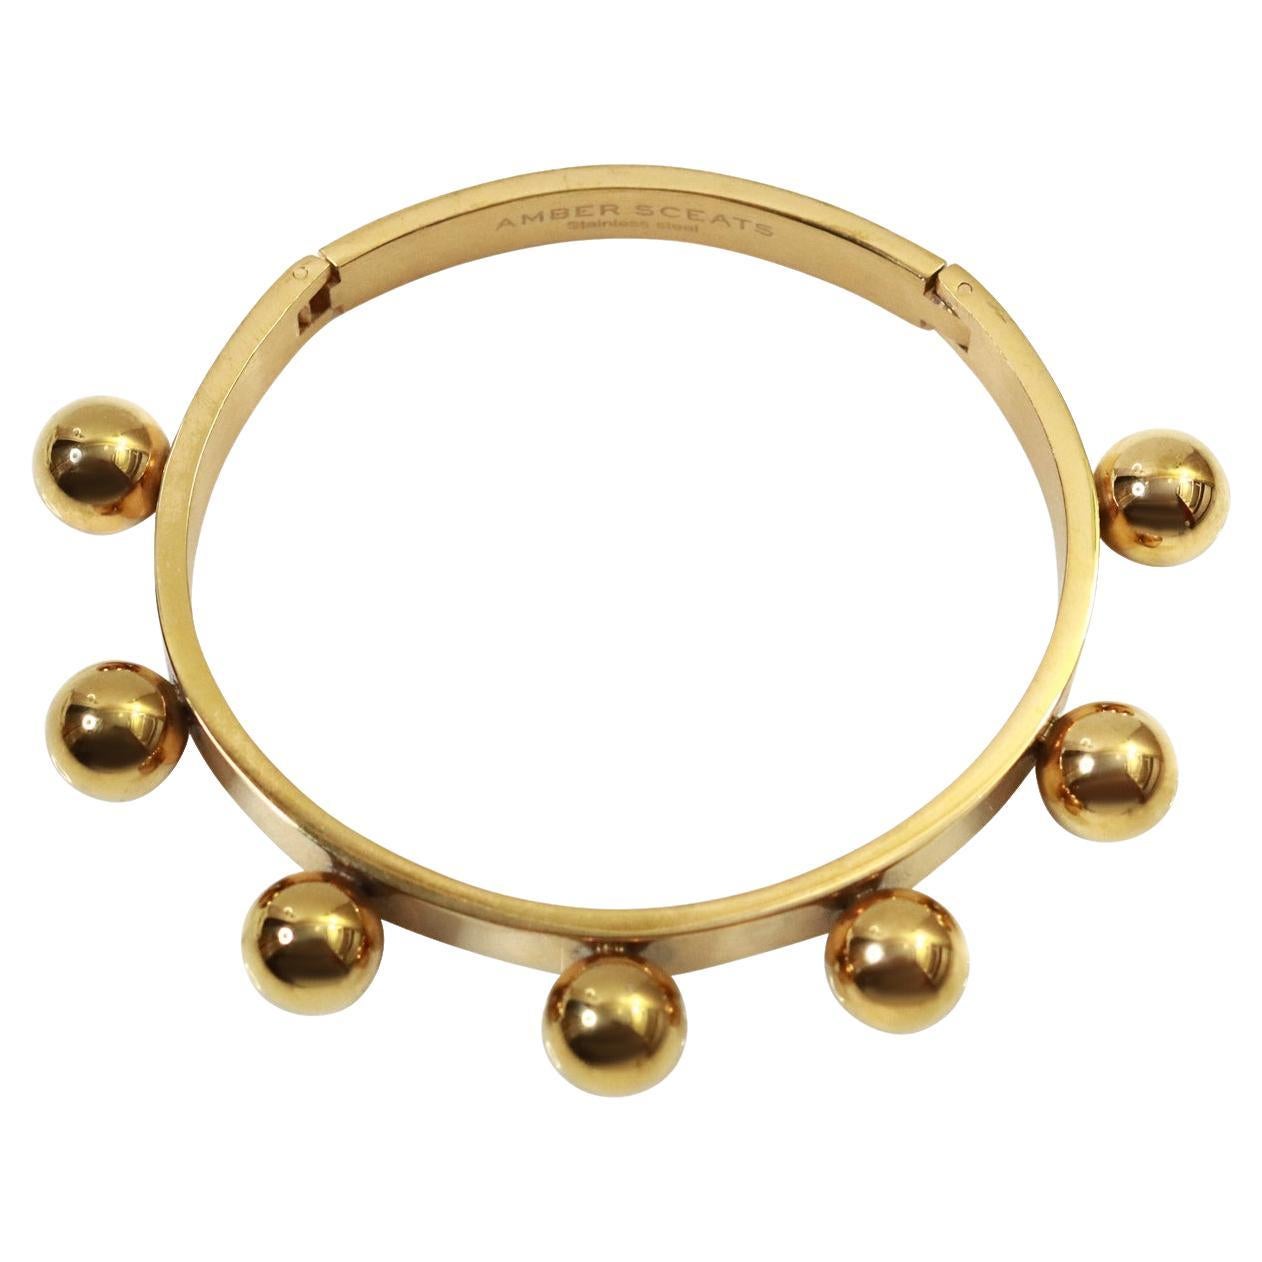 Vintage Gold Tone Heavy Bracelet With Fixed Balls Circa 1990s For Sale